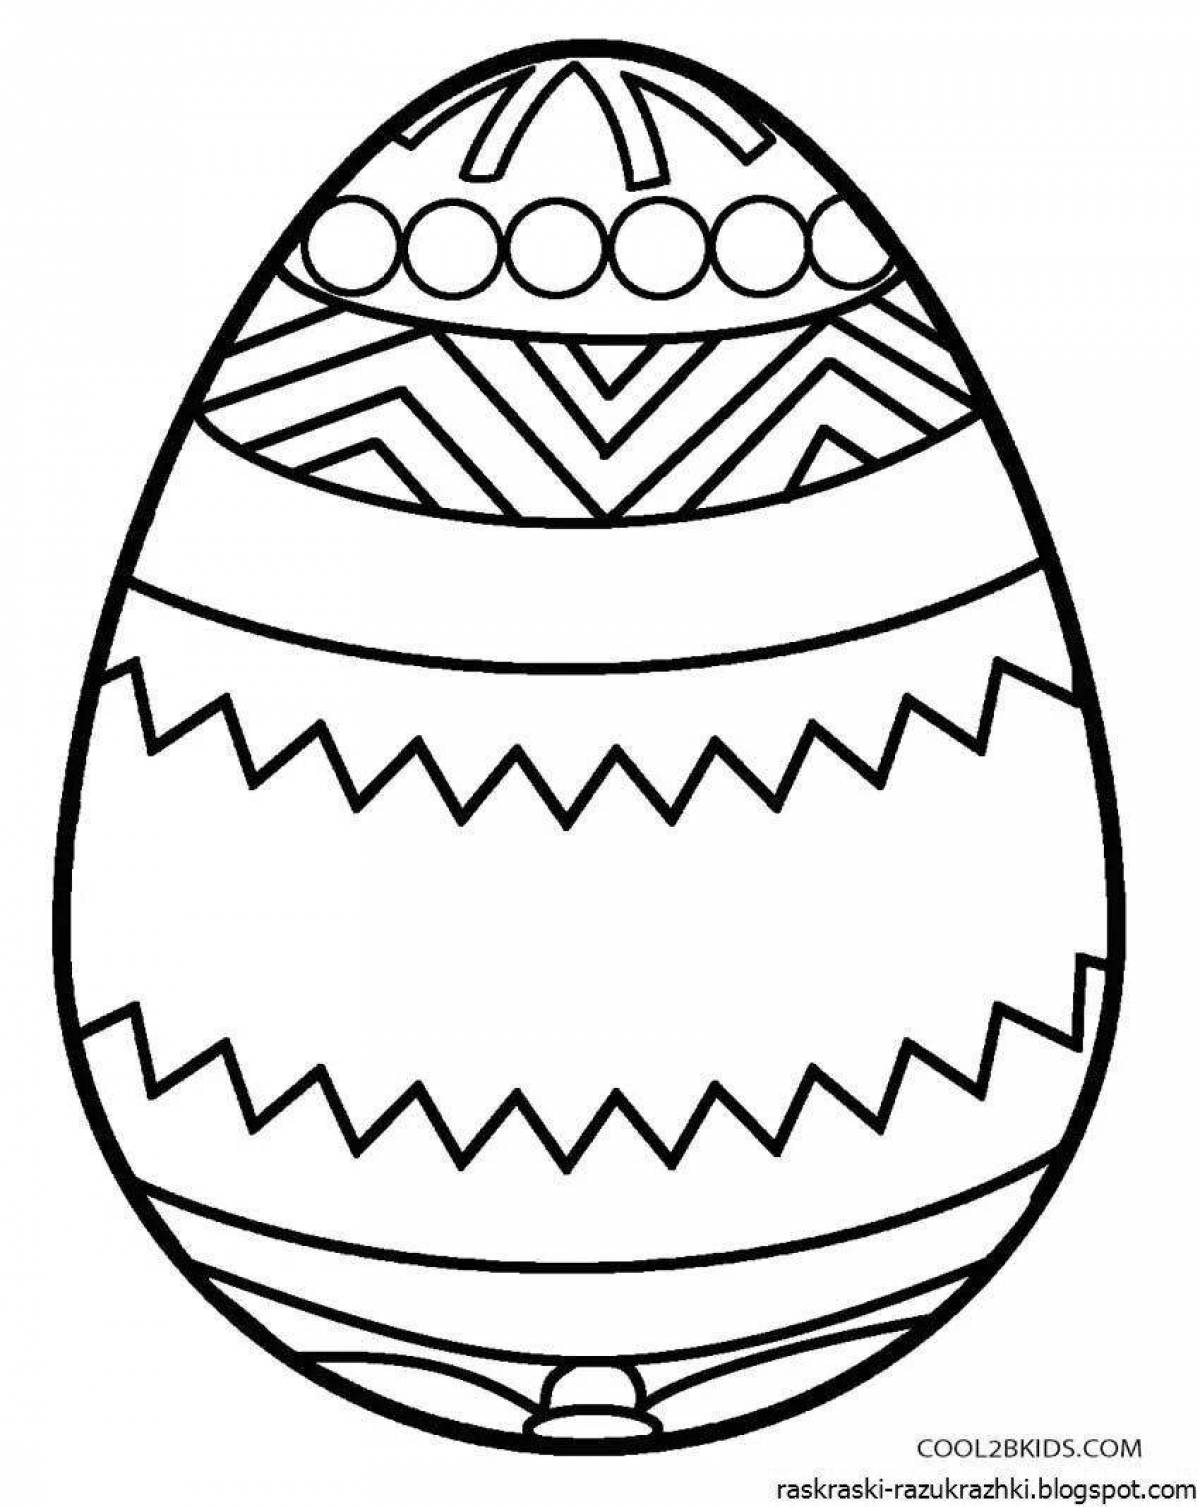 Creative Easter egg coloring for kids